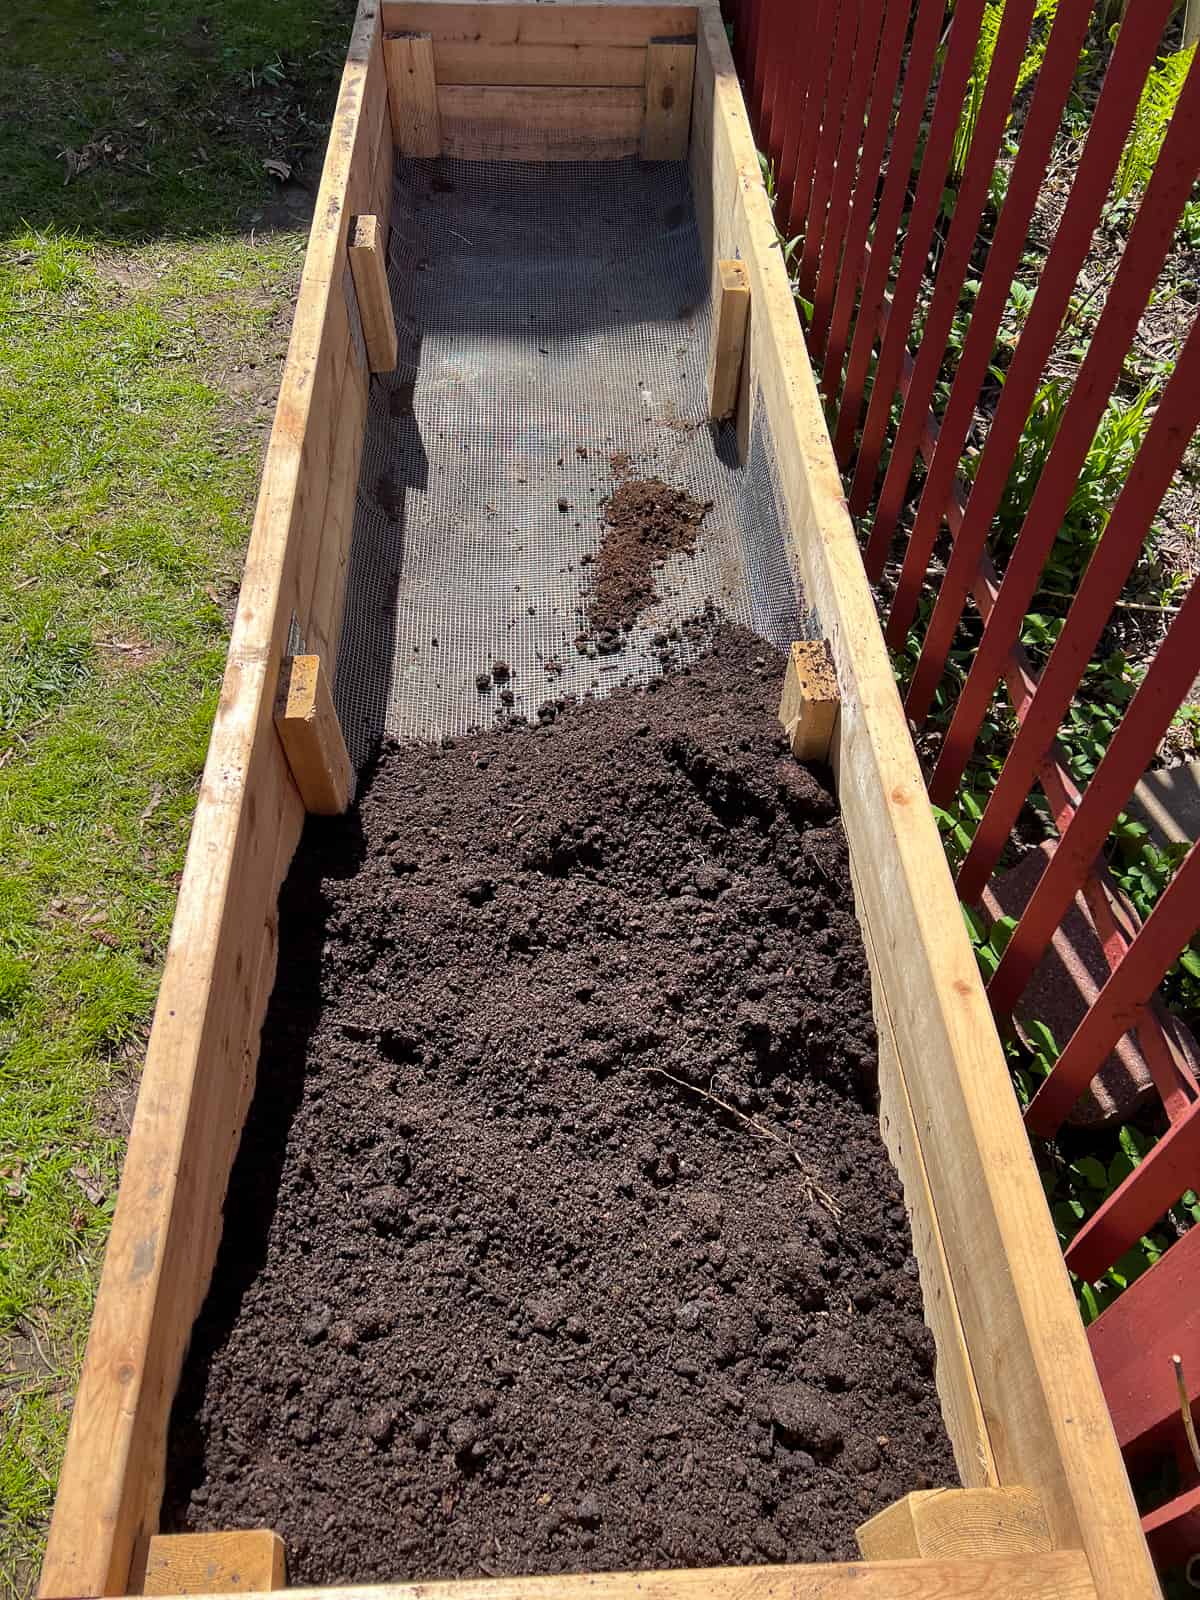 An image of a garden bed lined in metal mesh, beginning to be filled with soil, to help with the process of critter proofing raised bed.